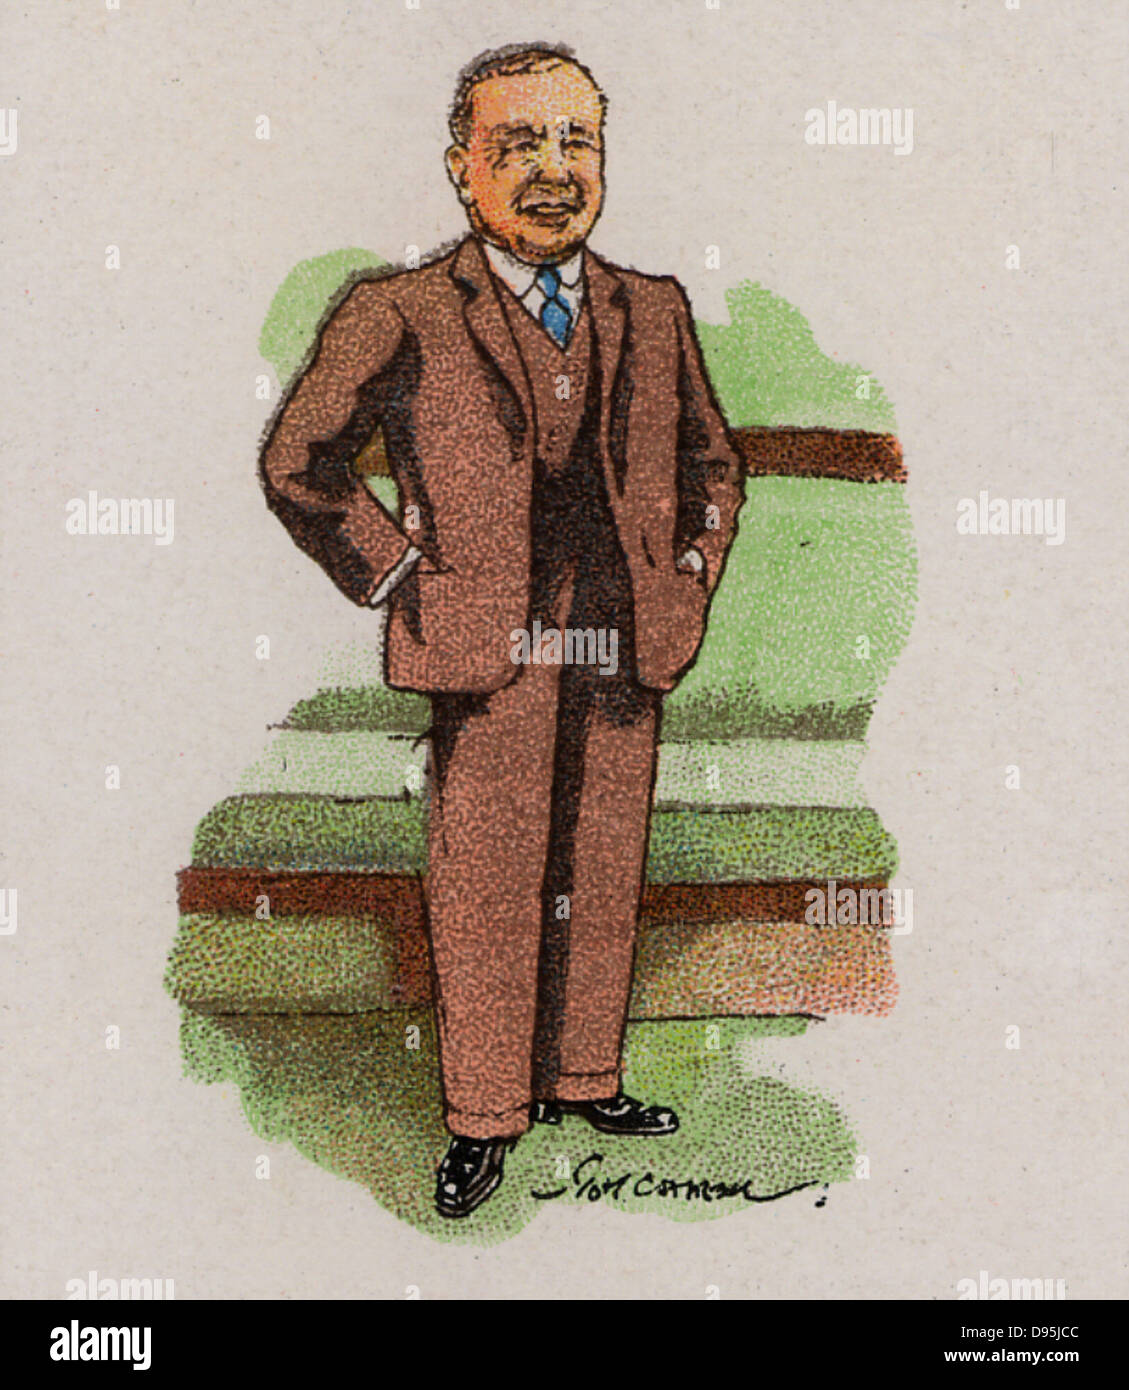 Arthur Henderson (1863-1935) Labour (socialist) politician and trade union leader born in Glasgow, Scotland.   Home Secretary. Foreign Secretary (1929-1931). Awarded the Nobel Peace Prize (1934). From a series of cards on 'Notable MPs' (London, 1929). Stock Photo